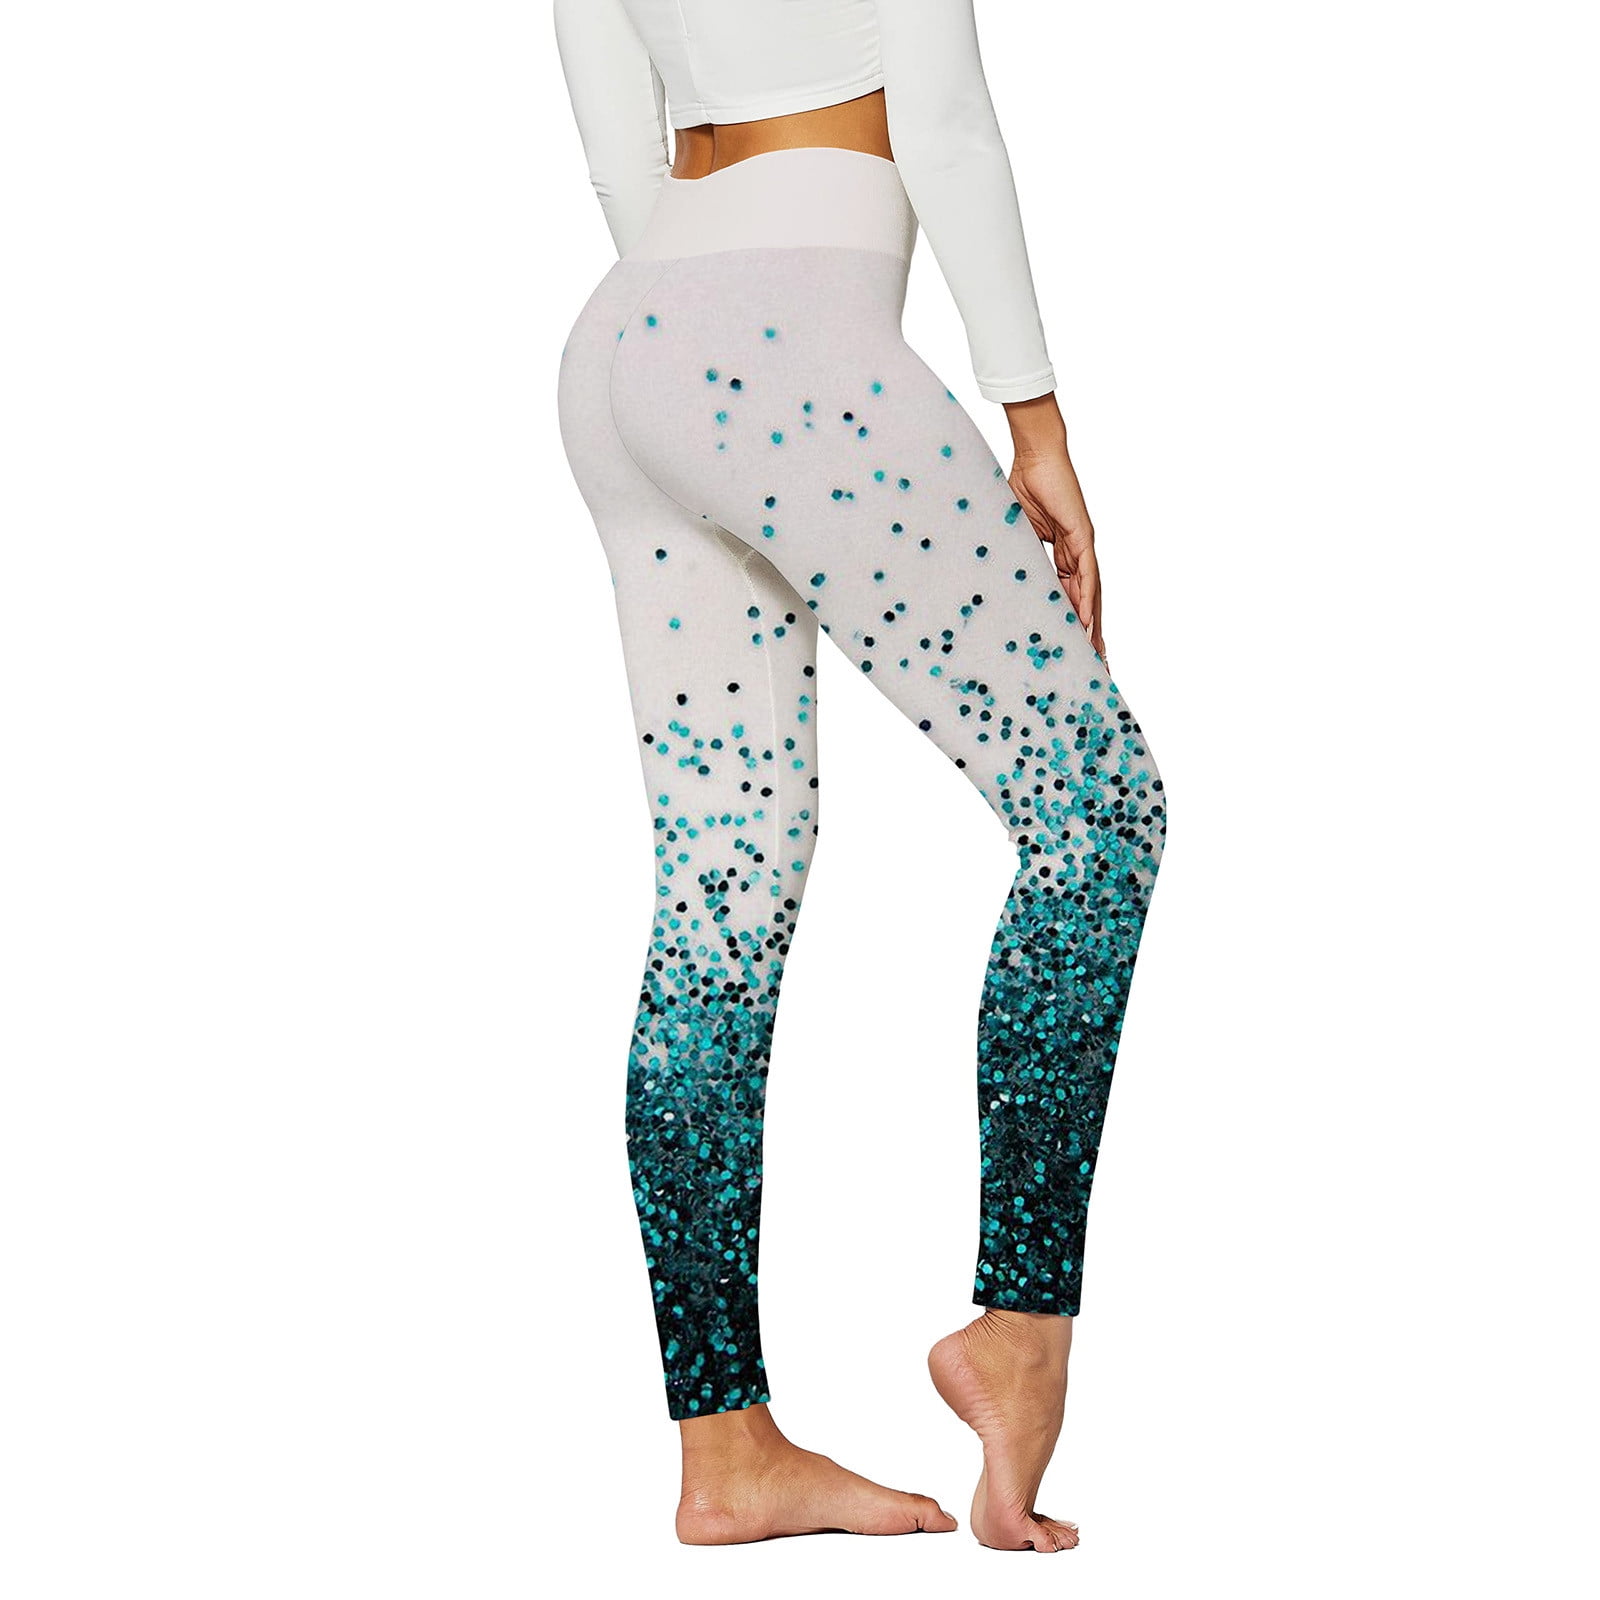 Womens Yoga Pants Package Yoga Pants Men Stretch Women Tribal Style Printed  Leggings High Waisted Yoga Pants Full Length Workout Running Sports Tights